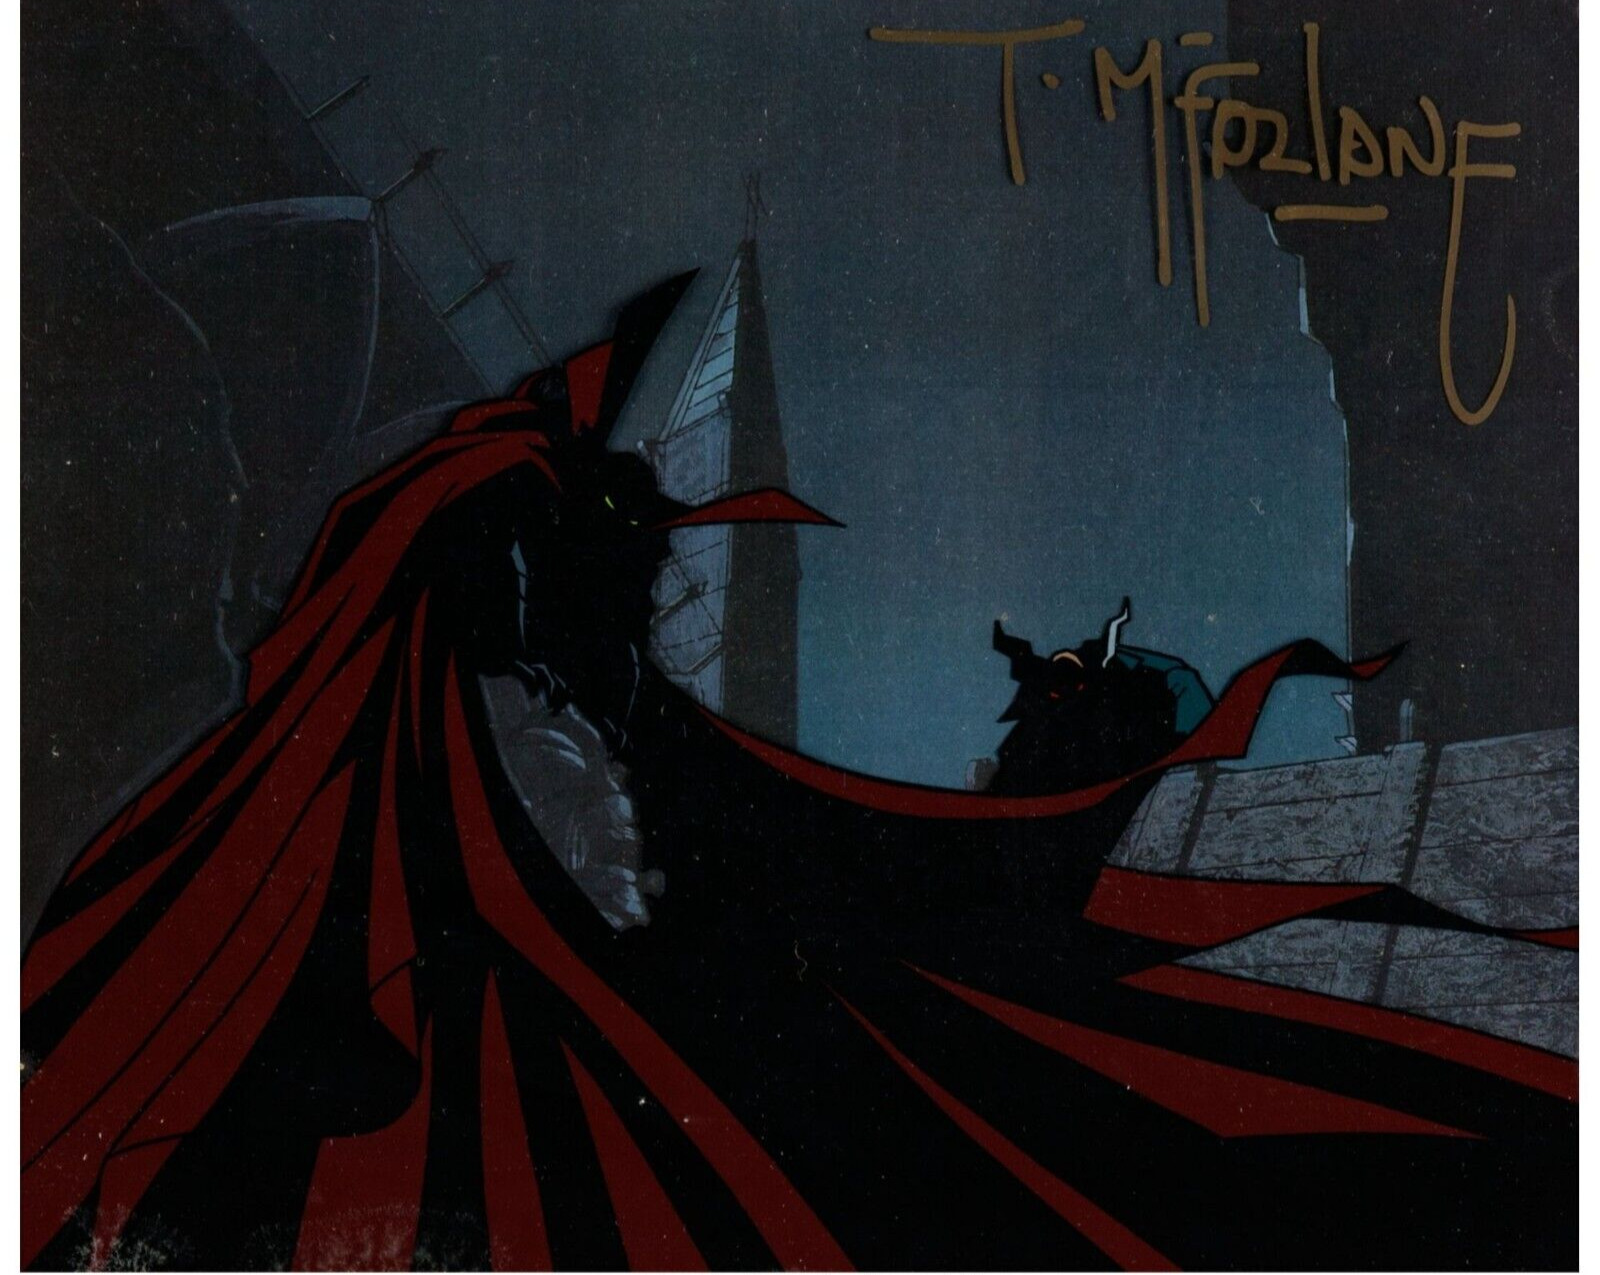 Spawn Todd McFarlane Signed Limited Edition Cel Animation Art (HBO, c. 2000)